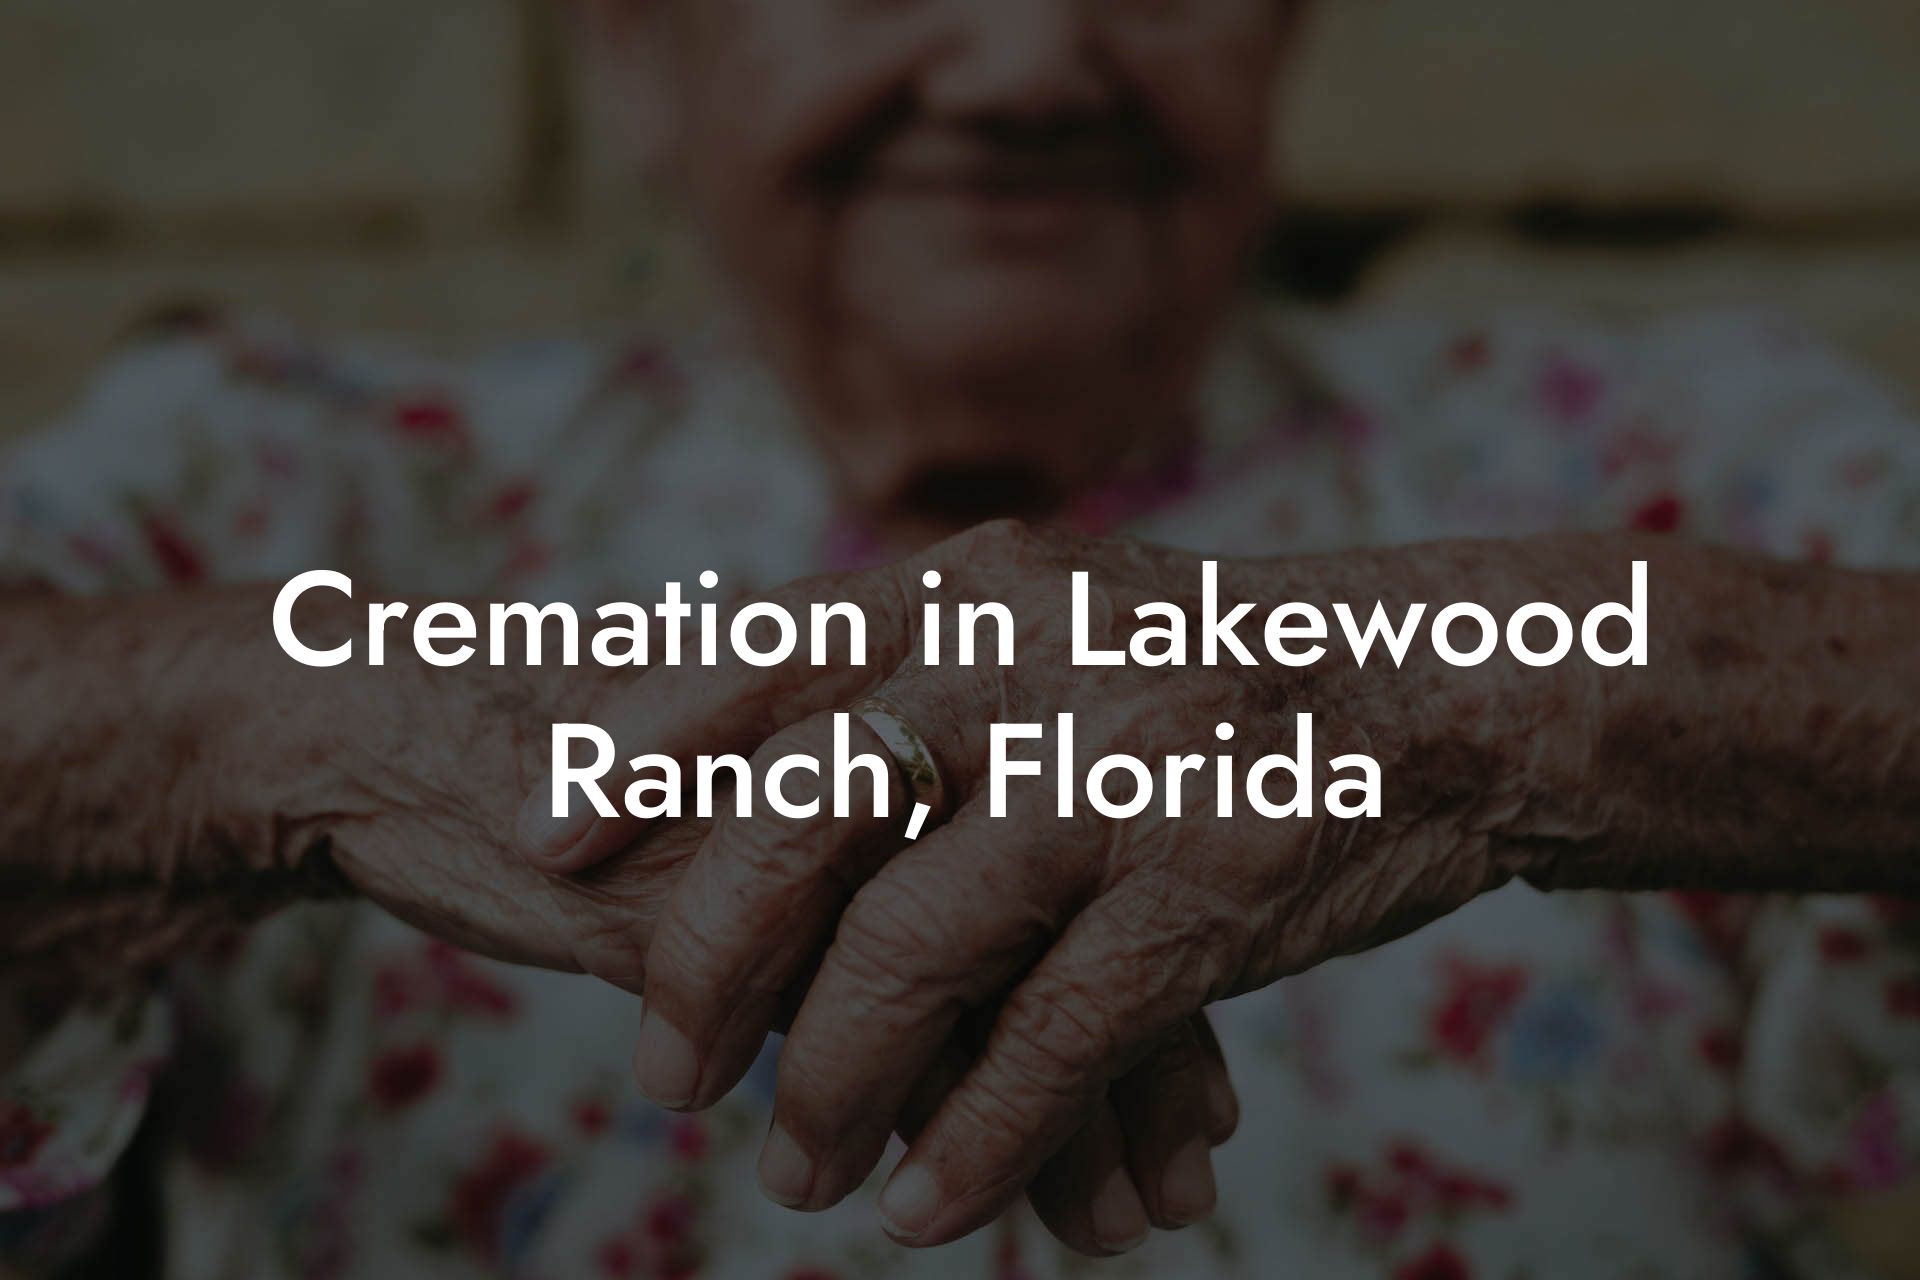 Cremation in Lakewood Ranch, Florida